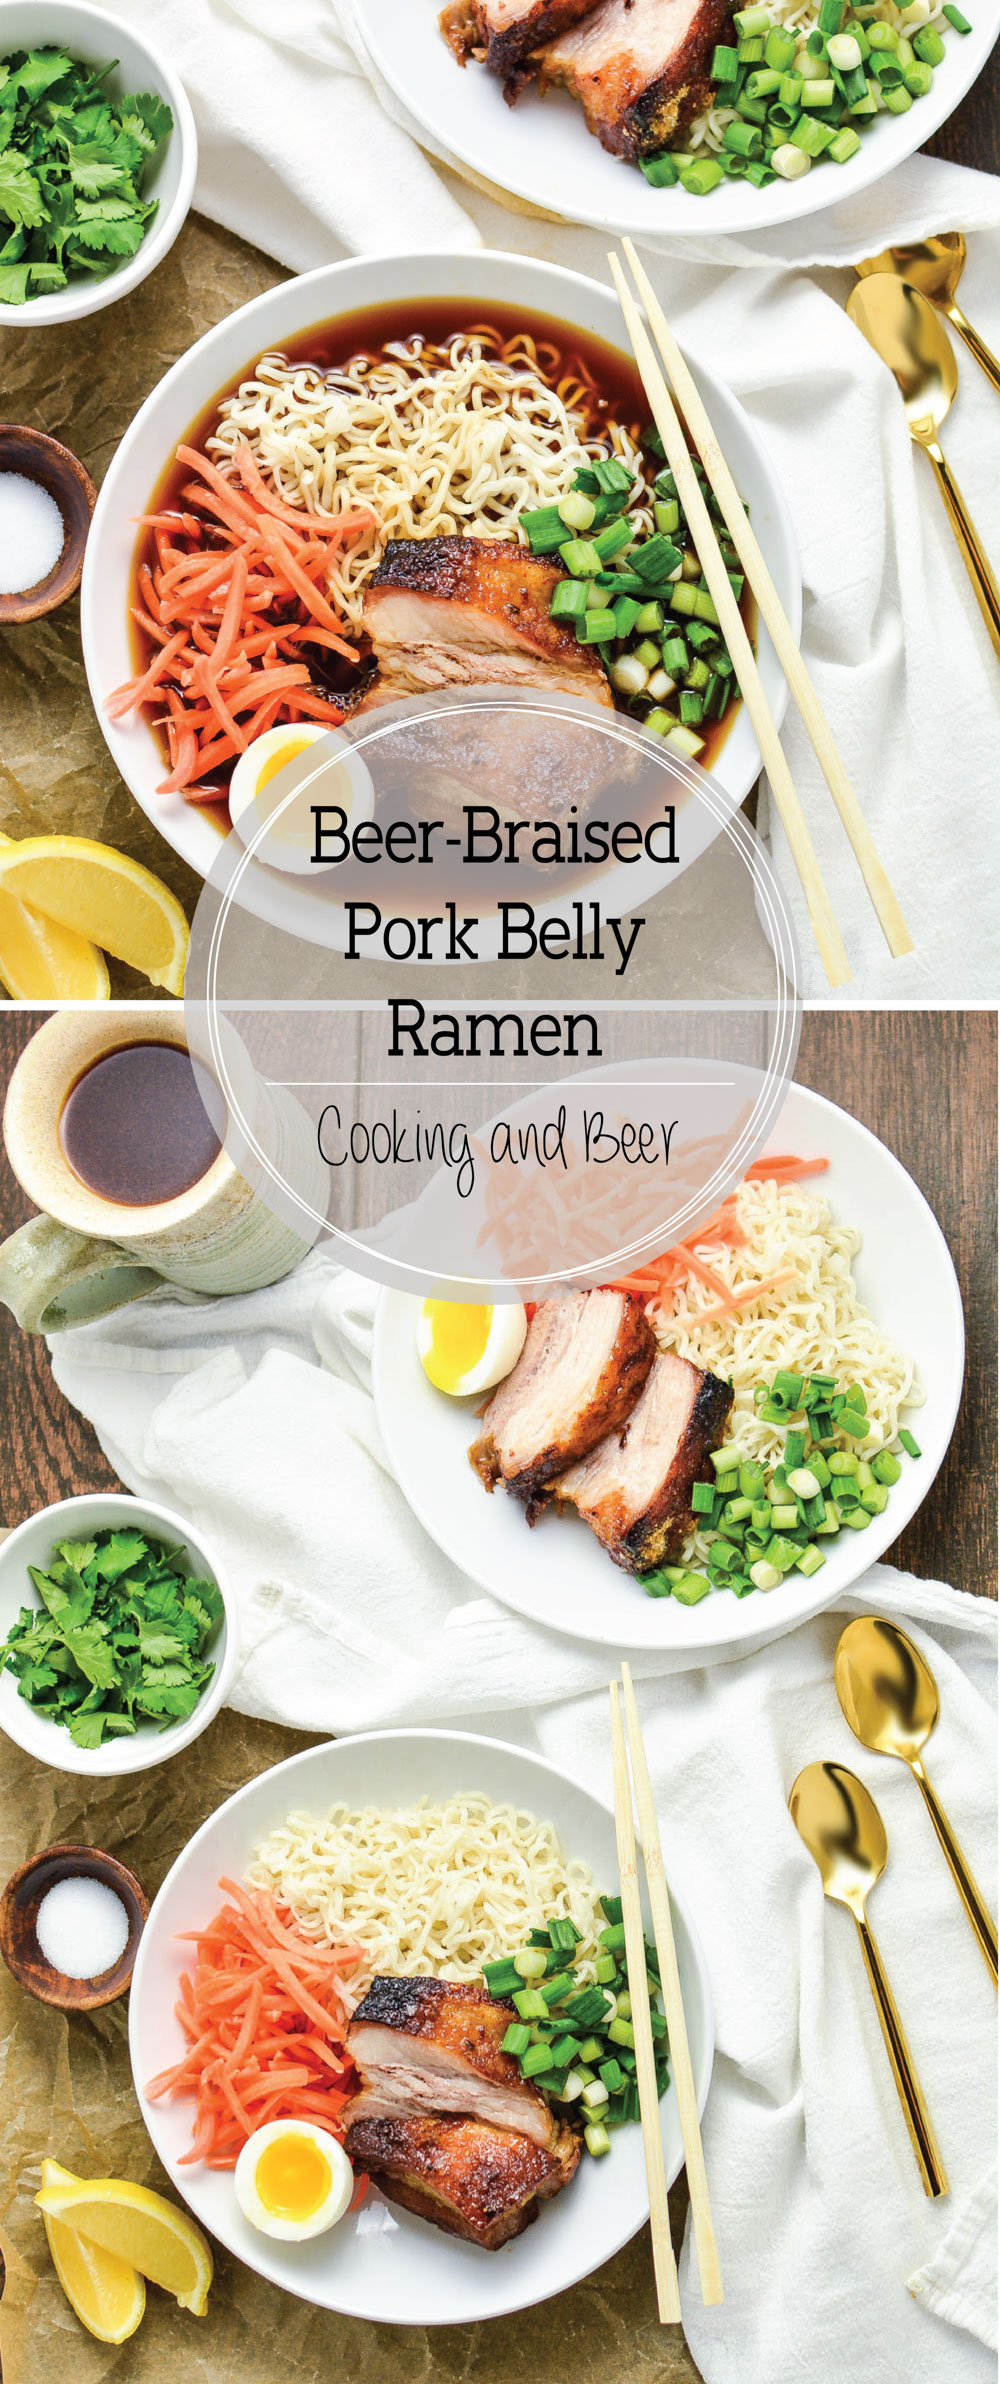 Beer-Braised Pork Belly Ramen is a scrumptious noodle dish that's made with a homemade ginger-flavored broth and tender beer-braised pork belly.